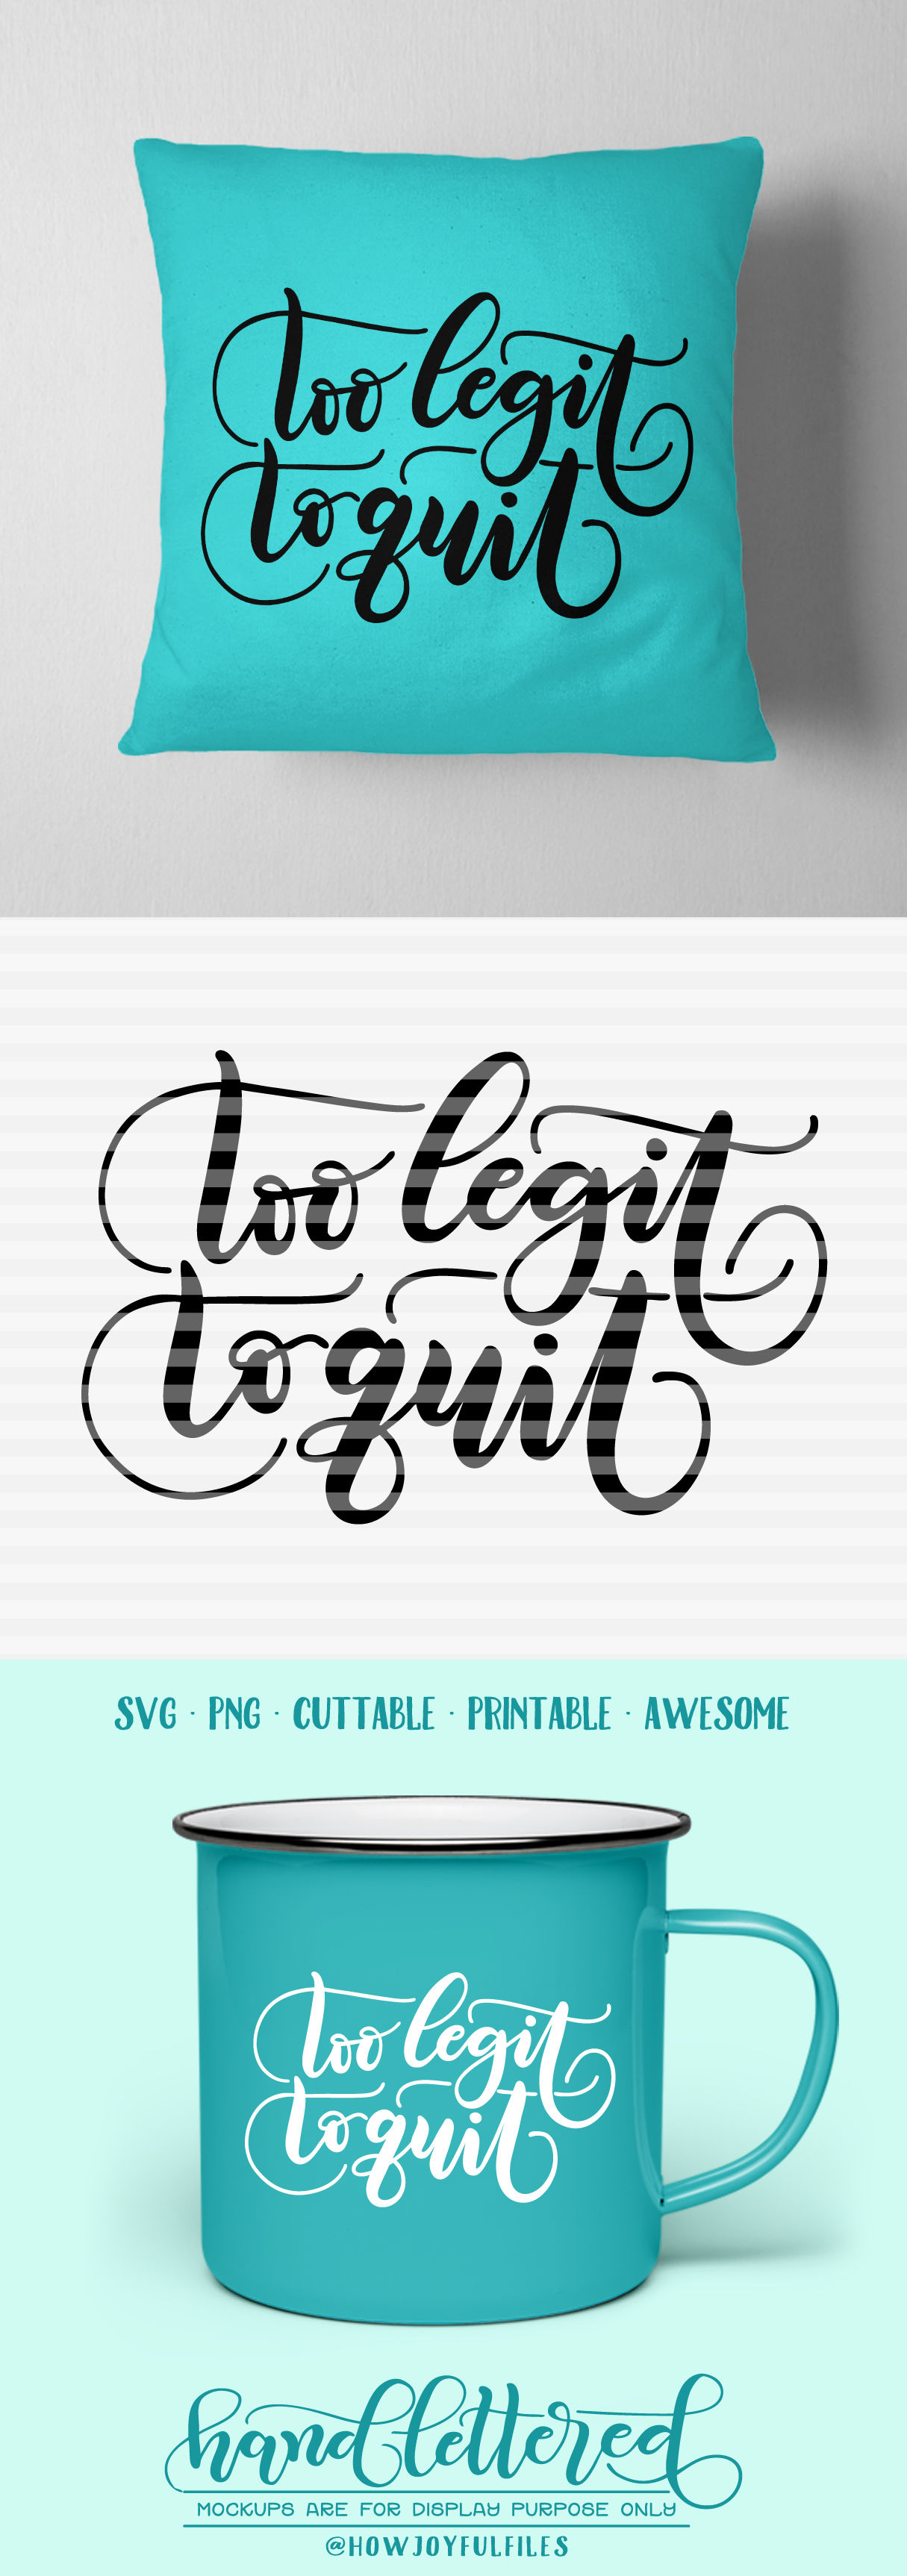 Too Legit To Quit Svg Dxf Pdf Hand Drawn Lettered Cut File By Howjoyful Files Thehungryjpeg Com